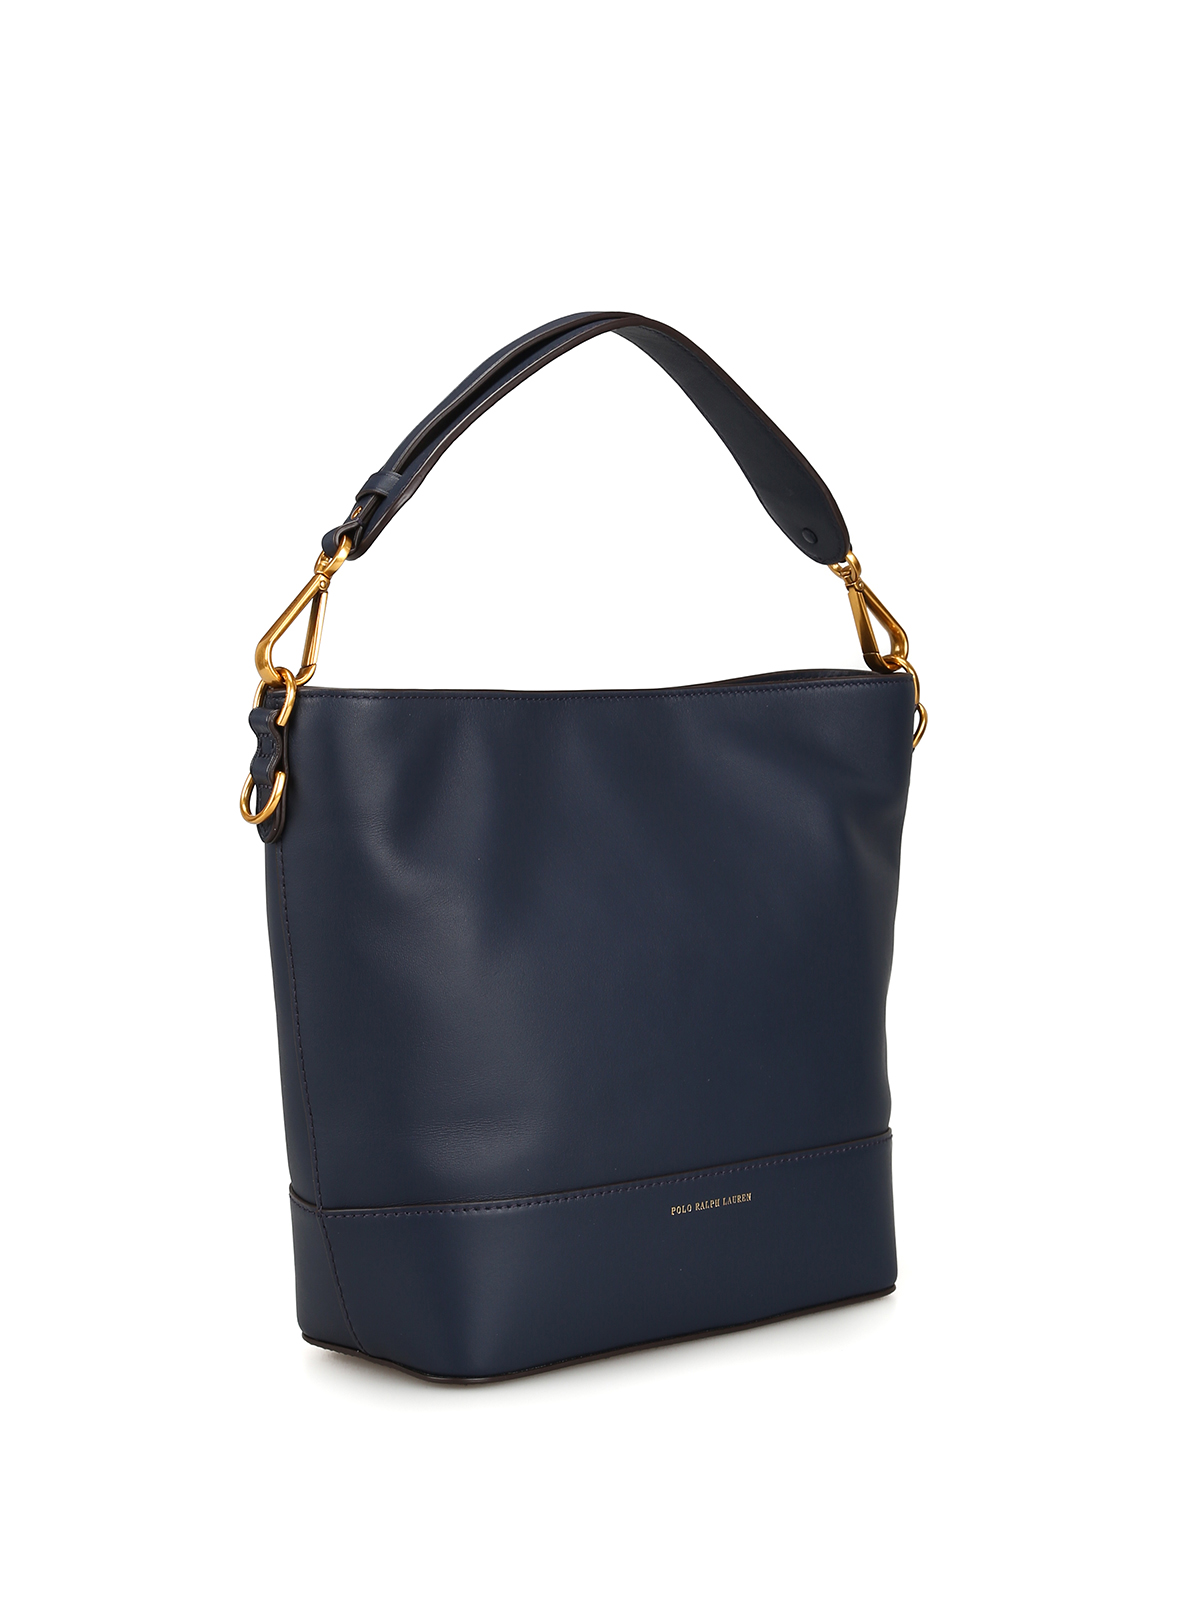 Totes bags Polo Ralph Lauren - Hobo S dark blue leather tote bag -  428728355006